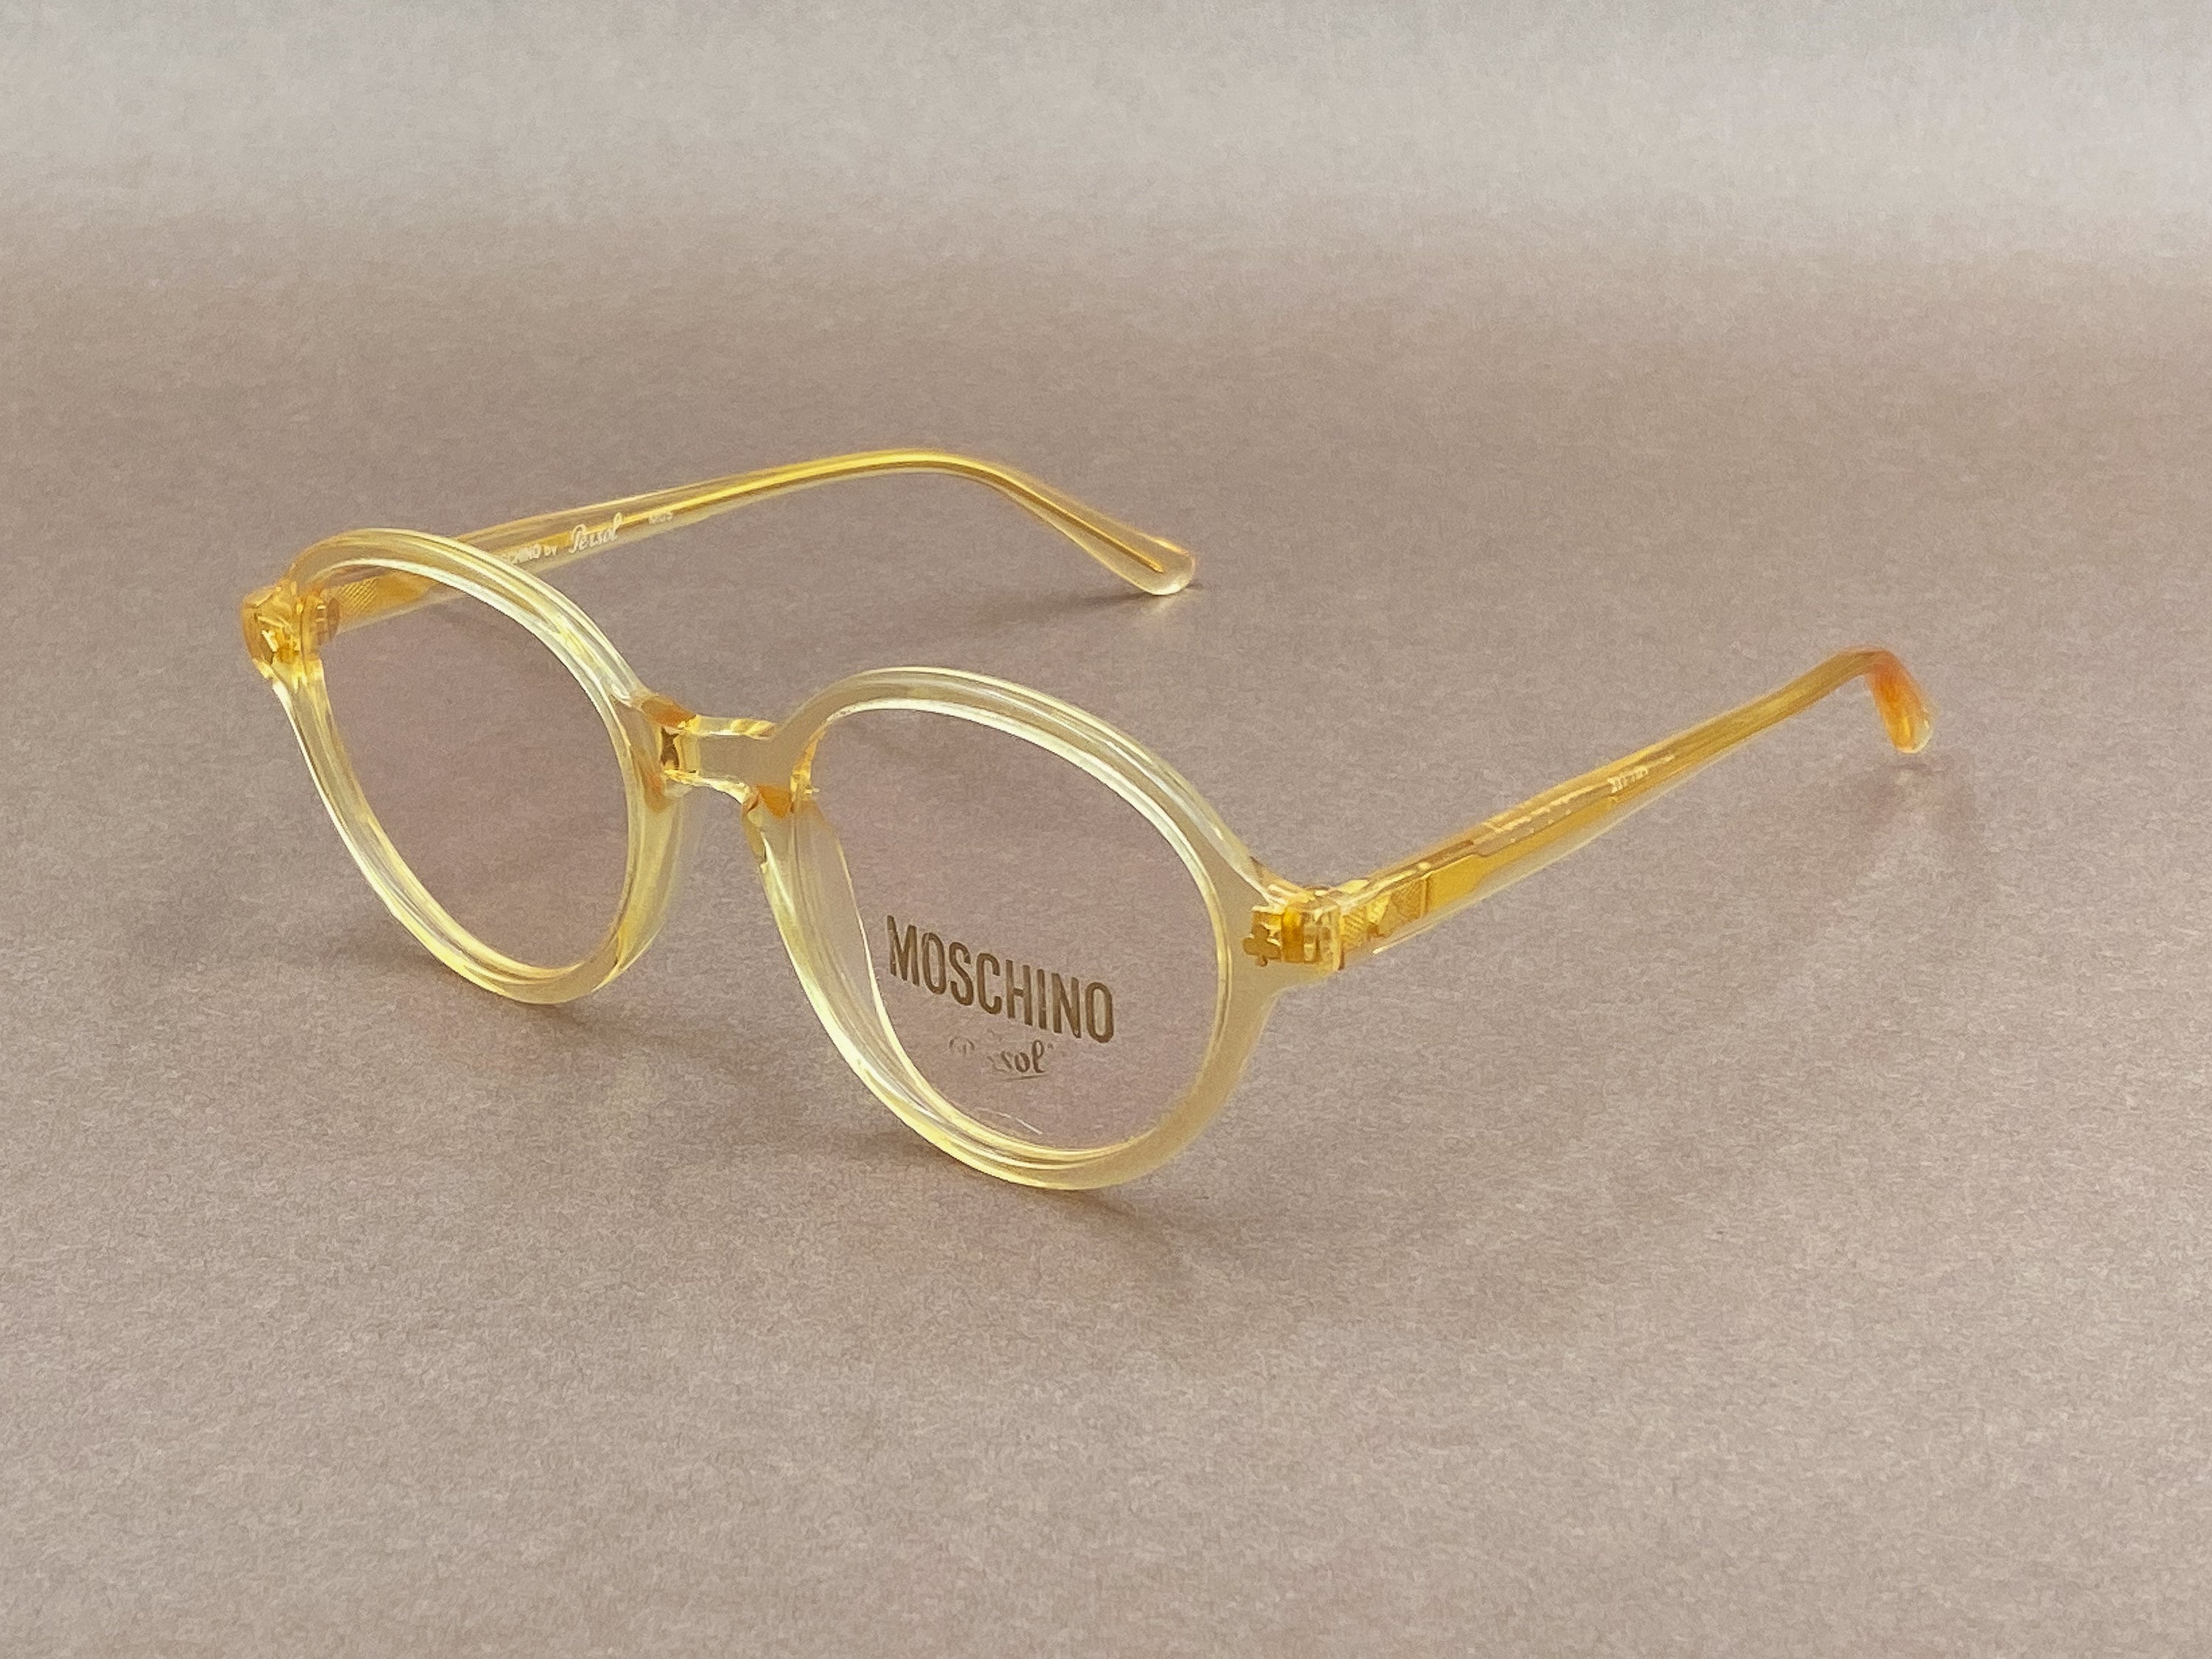 Moschino by Persol M05 eyeglasses